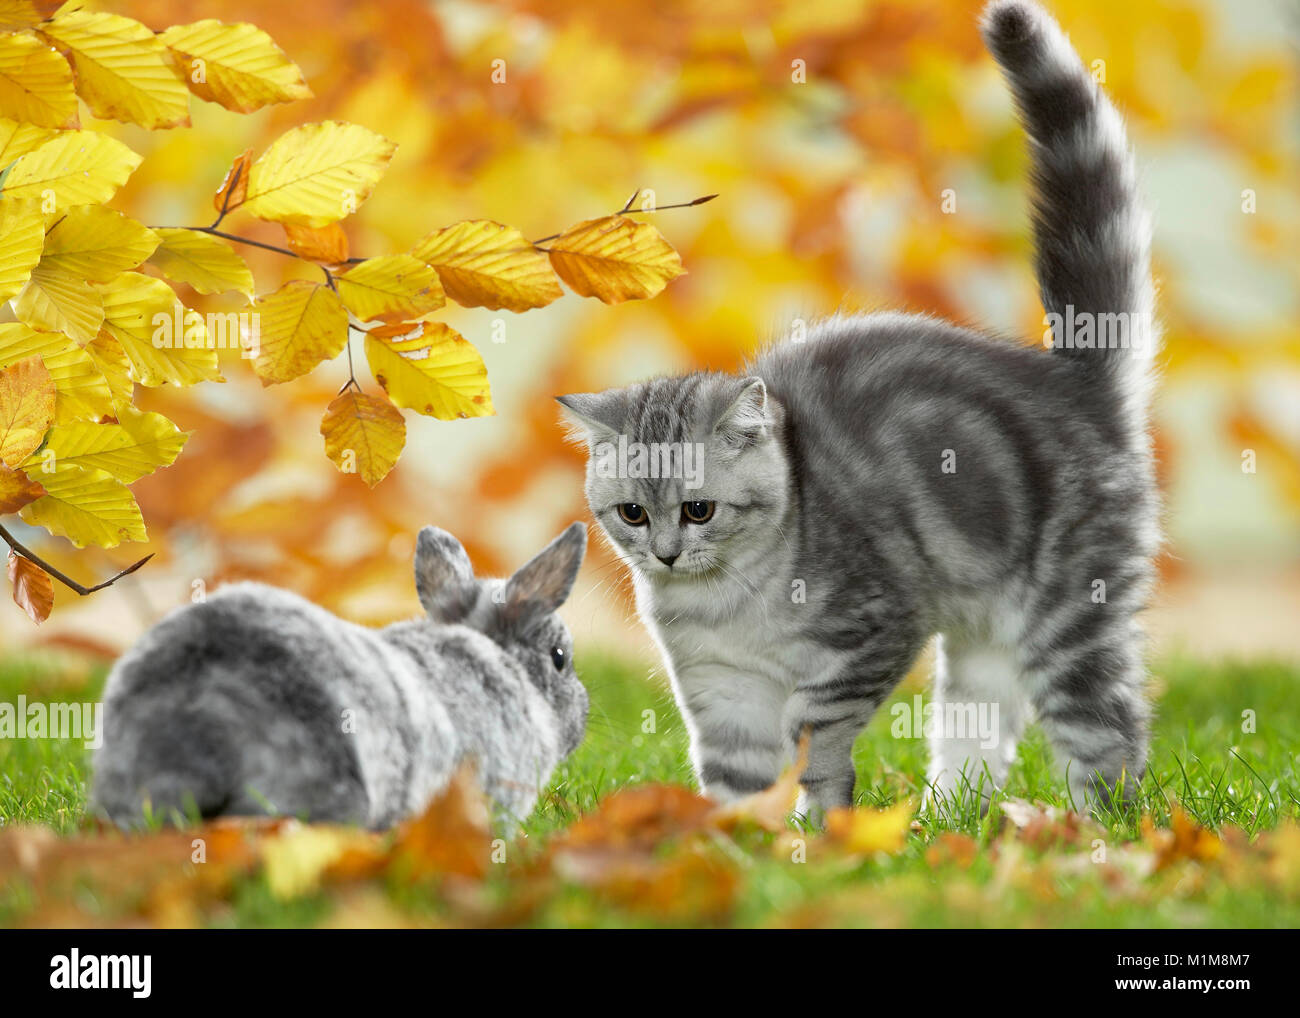 British Shorthair Cat and Dwarf Rabbit. Tabby kitten and bunny meeting in a garden in autumn, Germany Stock Photo